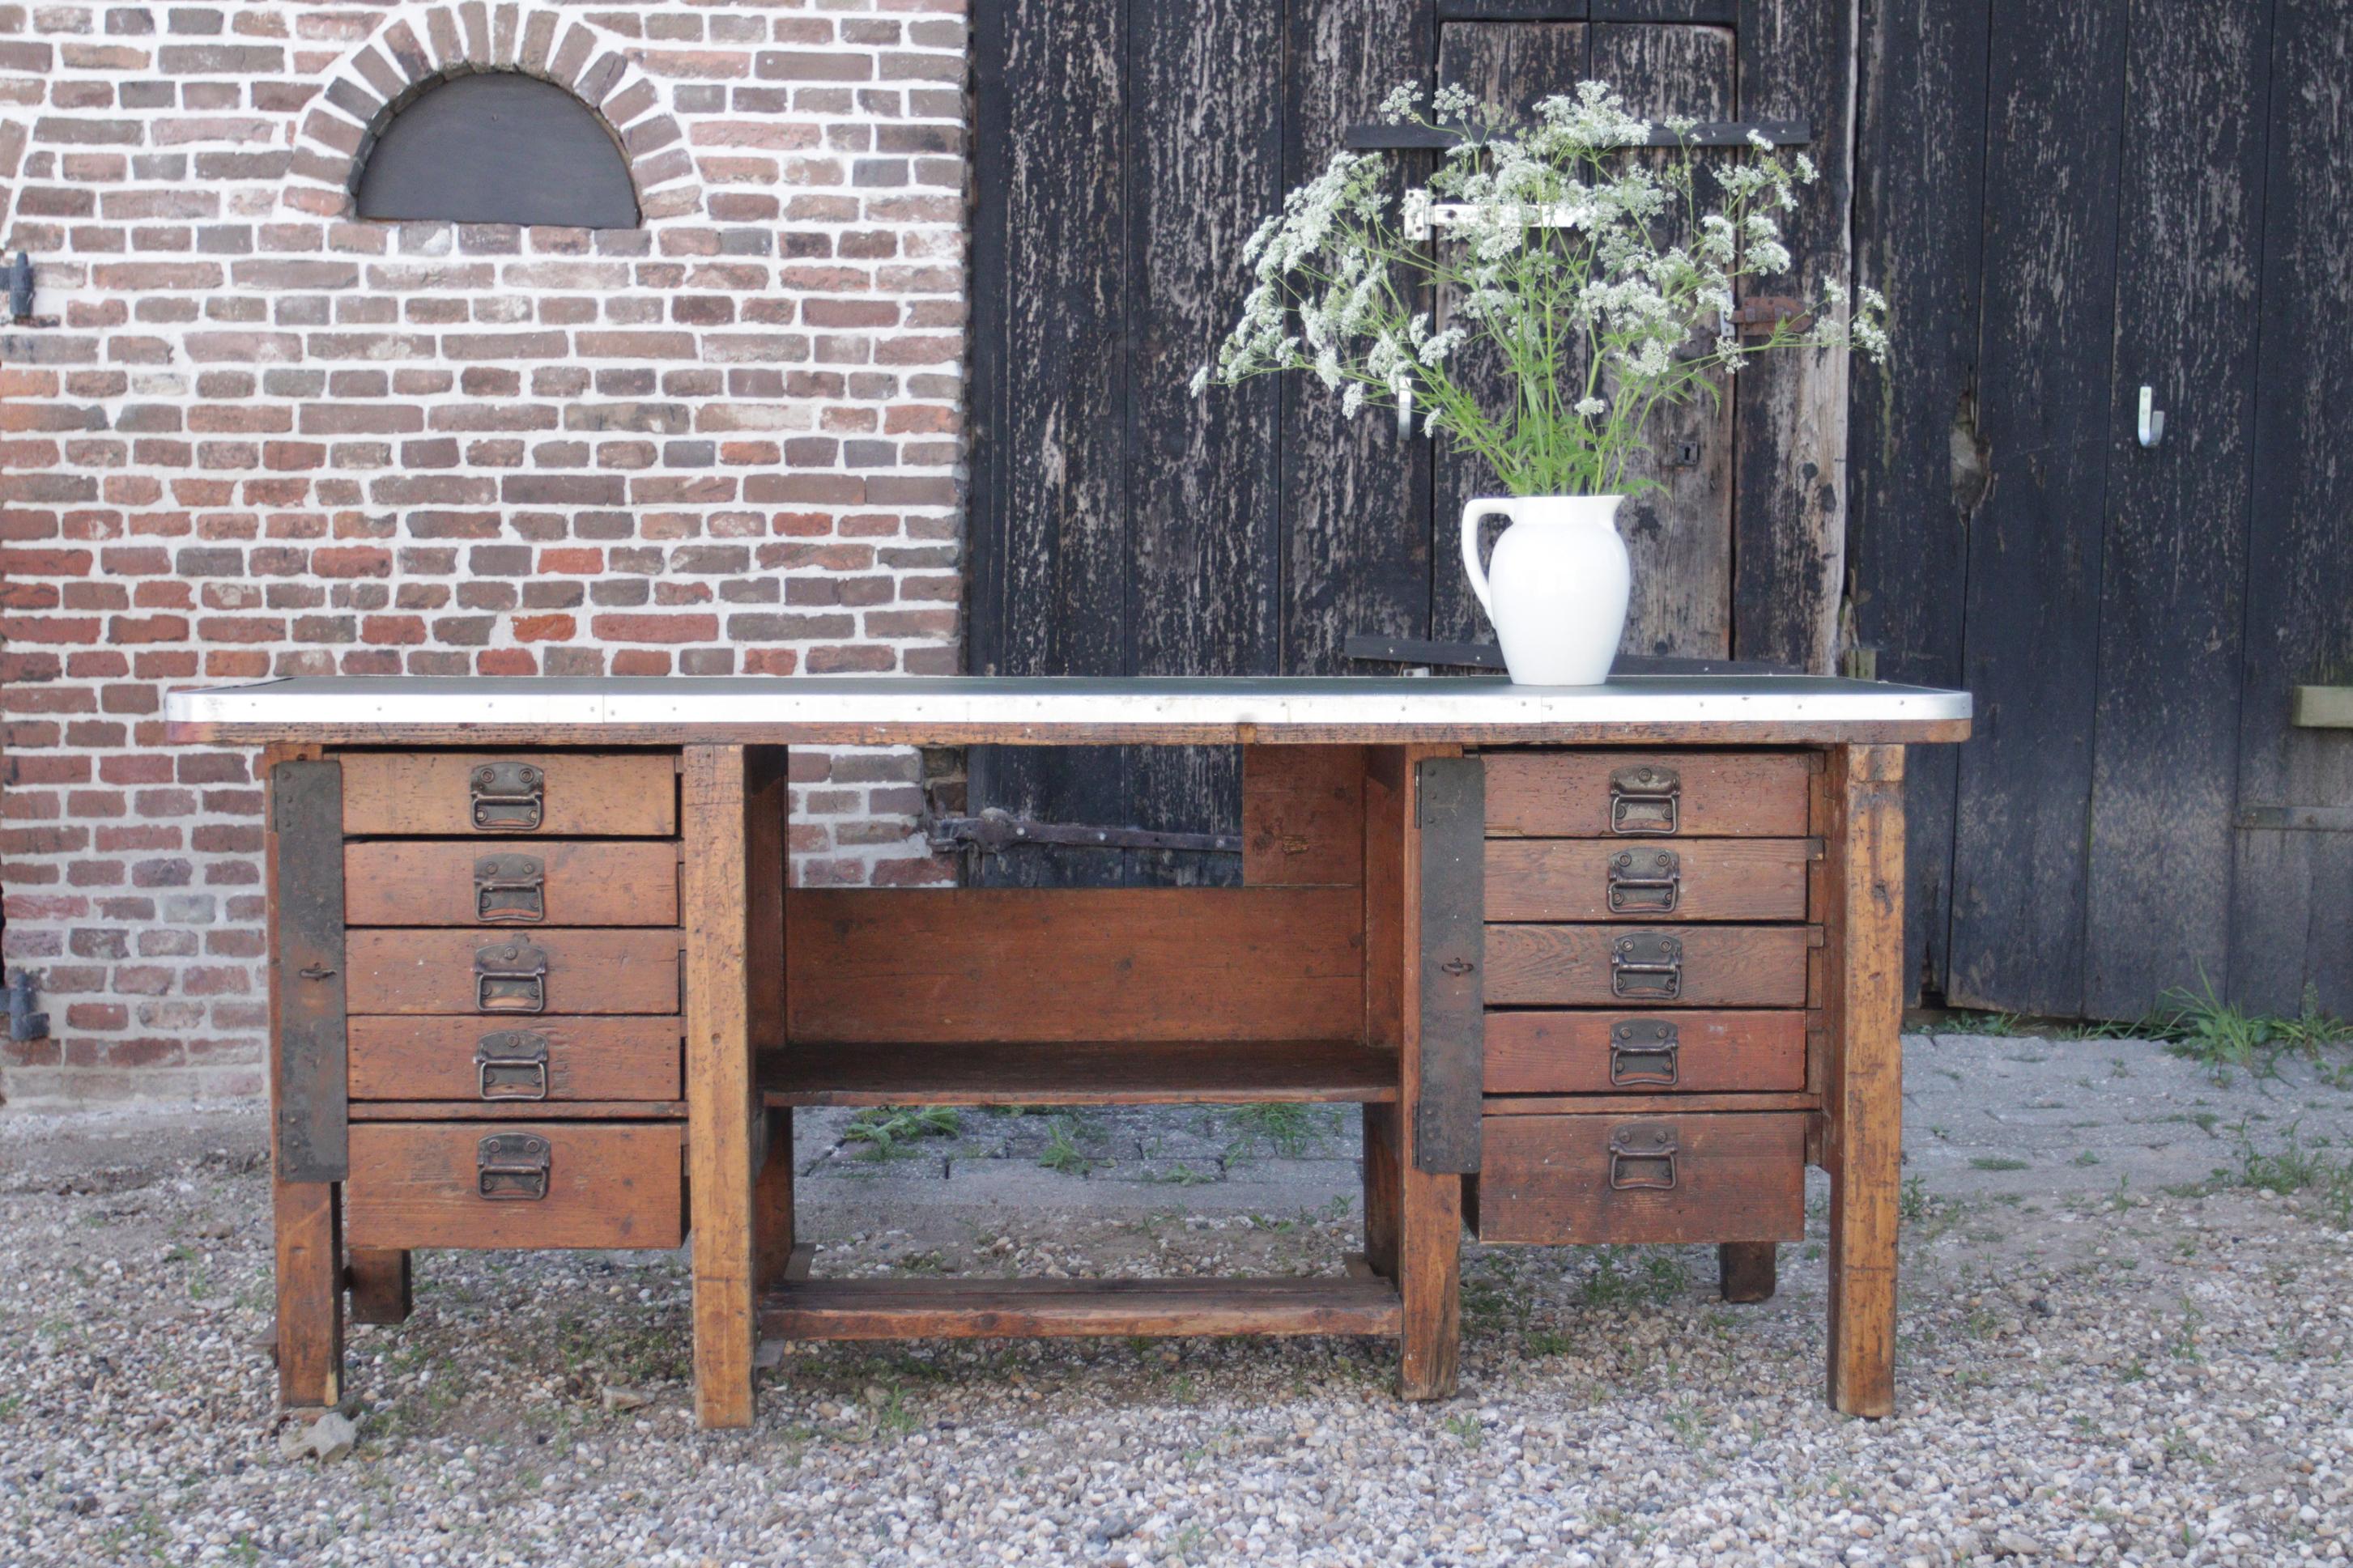 A heavy-duty, large vintage workbench as a statement in your interior—create a space filled with character and personality!

Are you looking for a distinctive piece to add character to your interior? Look no further! We have the perfect solution for